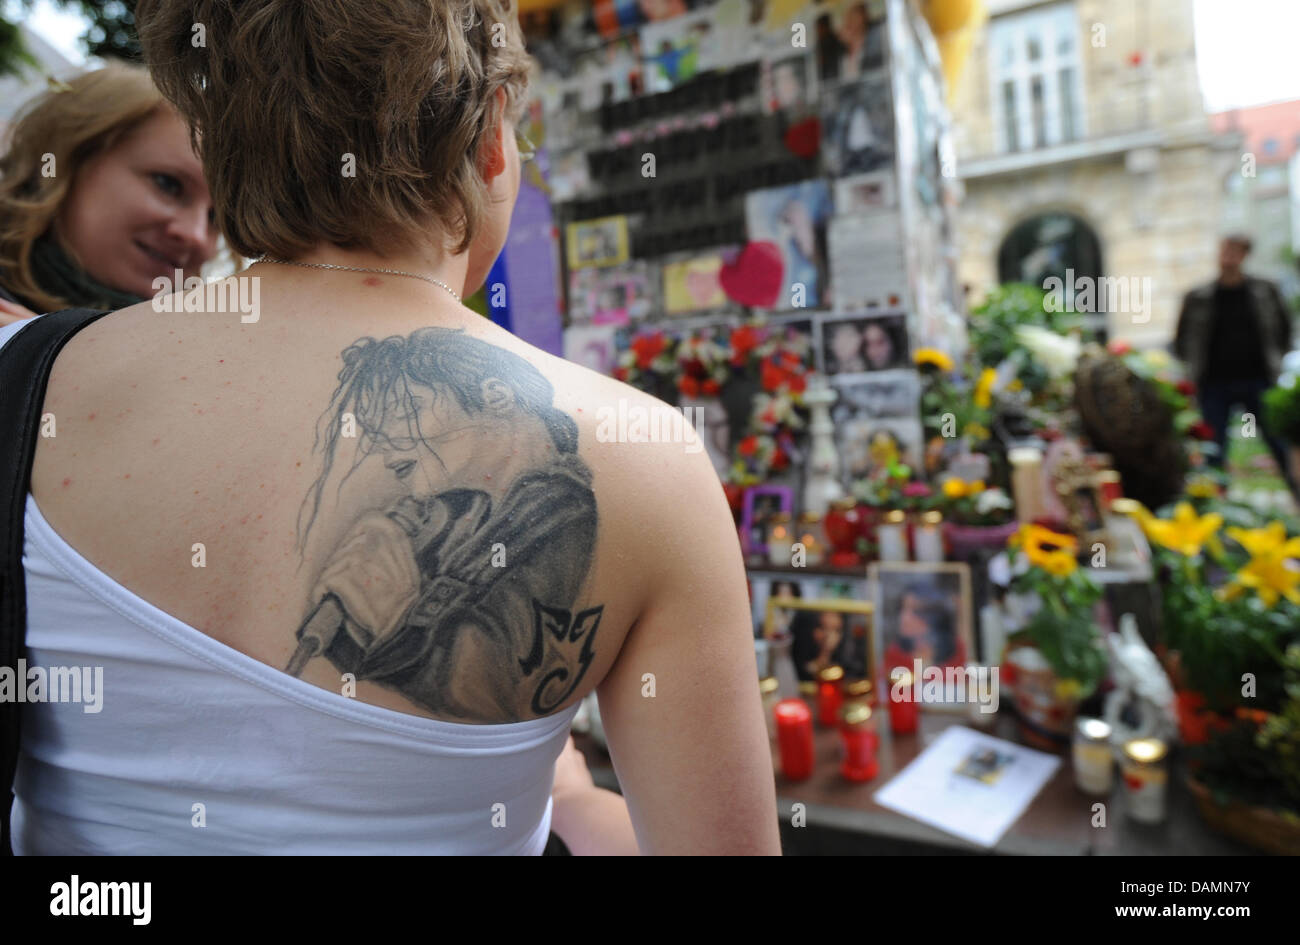 Franziska from Augsburg stands in front of the inofficial Michael Jackson monument in front of Jackson's most frequently visited hotel in Munich, Germany, 25 June 2011. On her back, she has a tattoo of Michael Jackson's likeness. On 25 June 2009, the 'King of Pop' died of a narcotics overdose that led to heart failure. Photo: Andreas Gebert Stock Photo